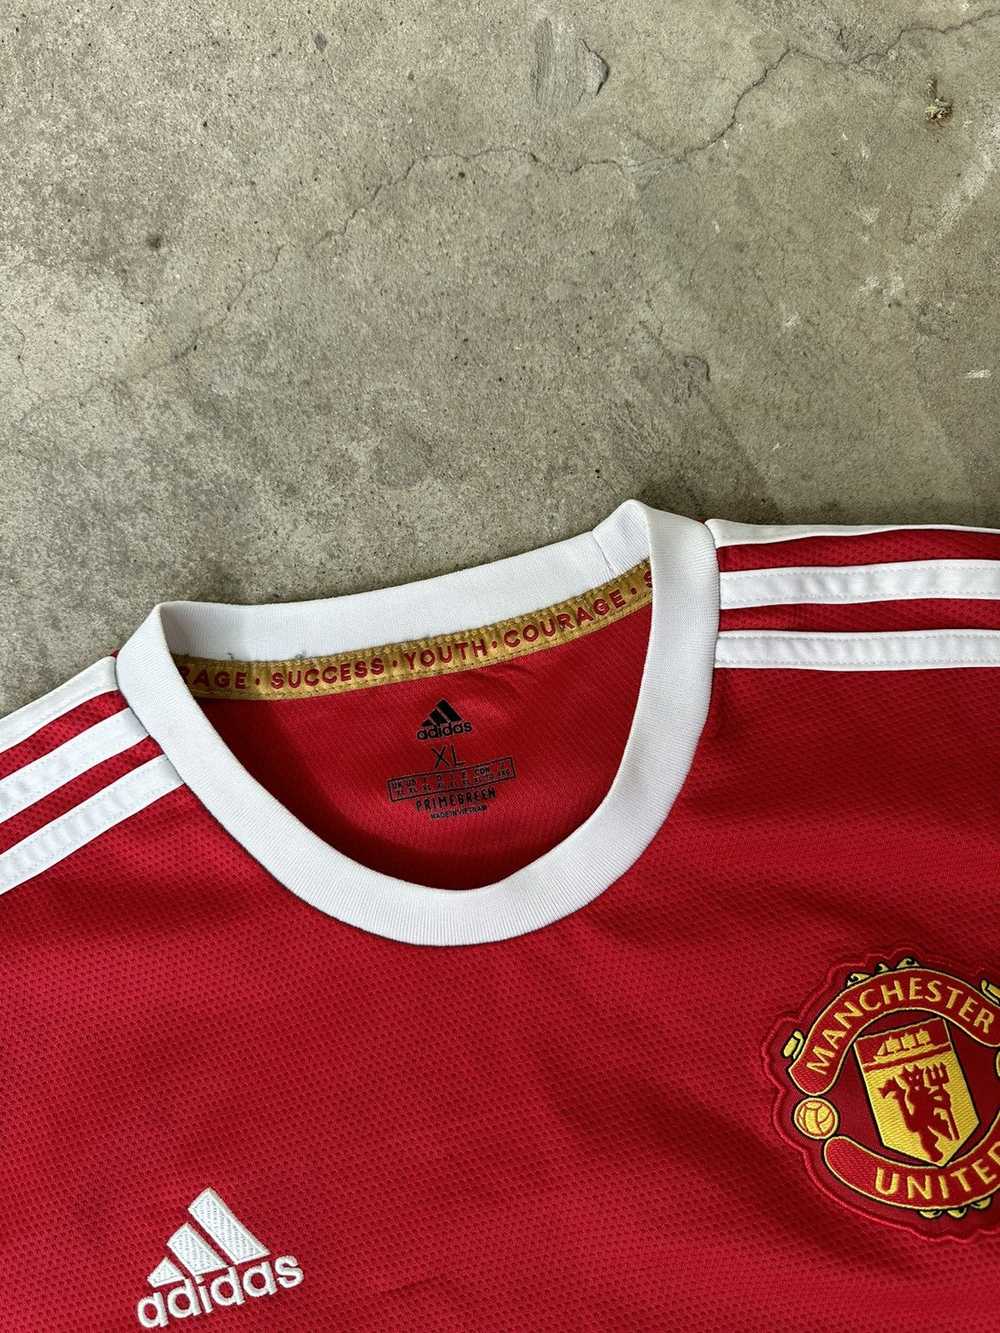 Adidas × Manchester United × Soccer Jersey MANCHE… - image 3